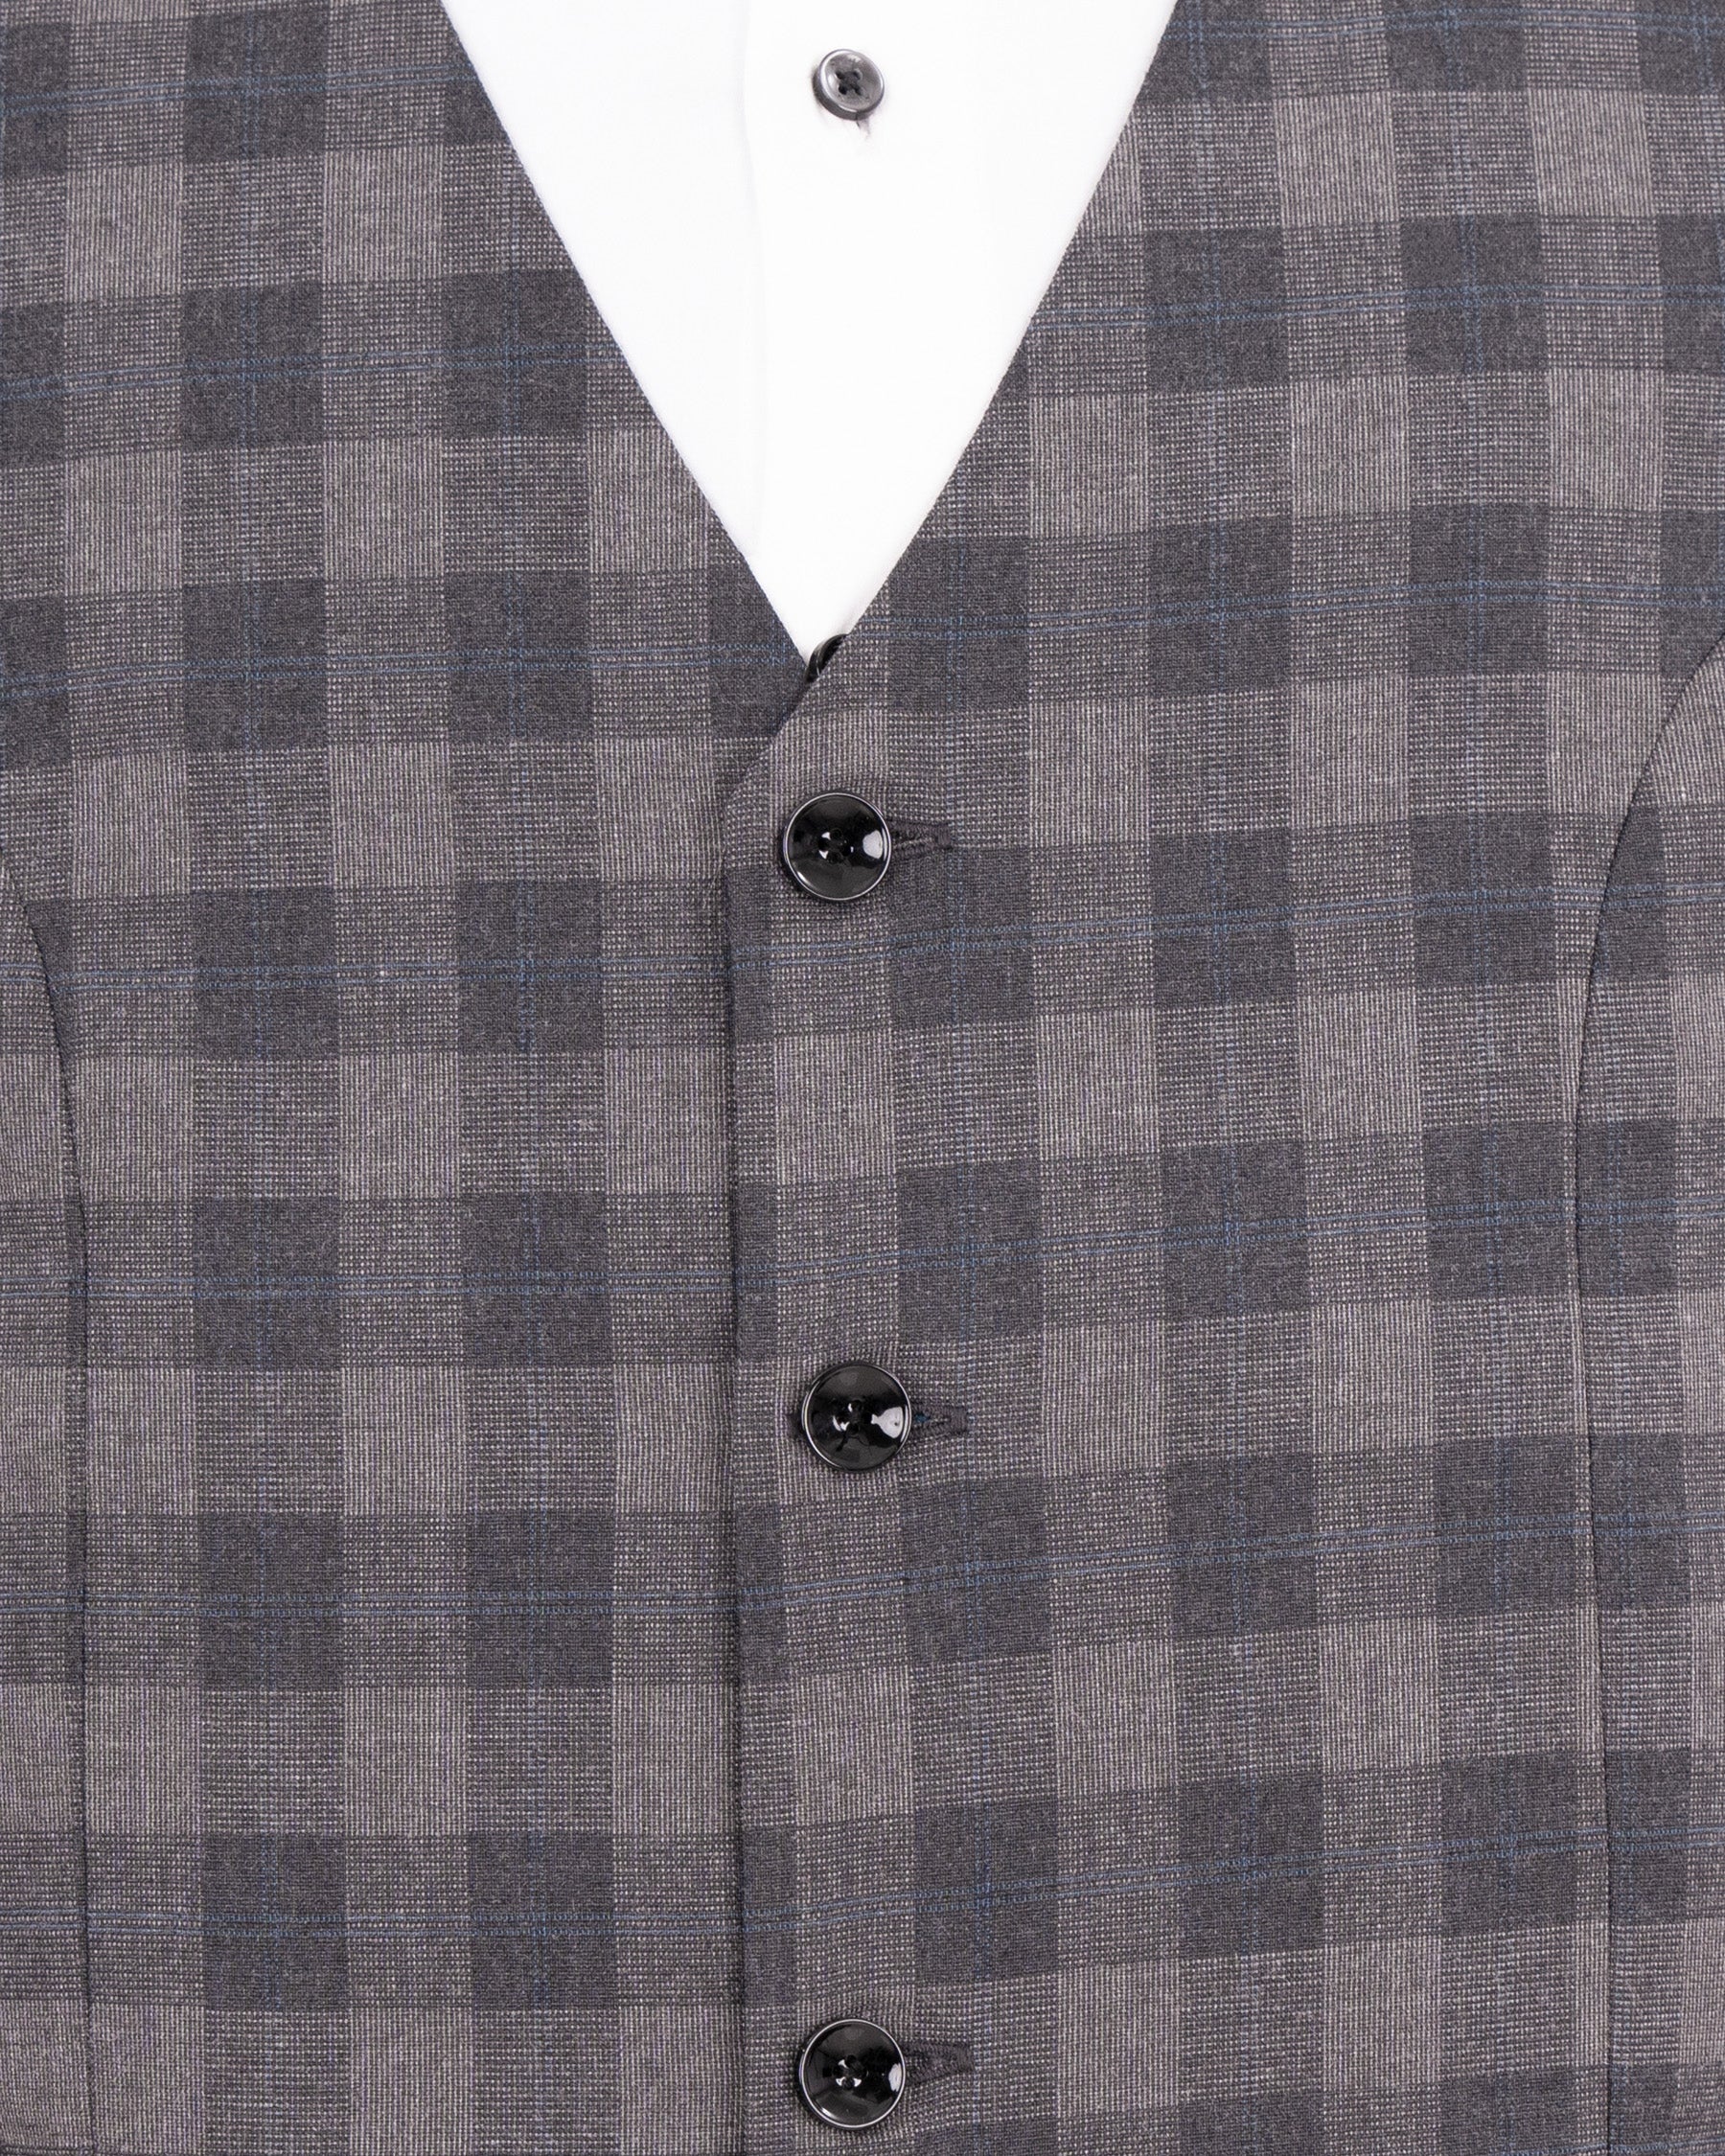 Nobel and Chicago Grey Plaid Wool Rich Waistcoat V1455-36, V1455-38, V1455-40, V1455-42, V1455-44, V1455-46, V1455-48, V1455-50, V1455-52, V1455-54, V1455-56, V1455-58, V1455-60